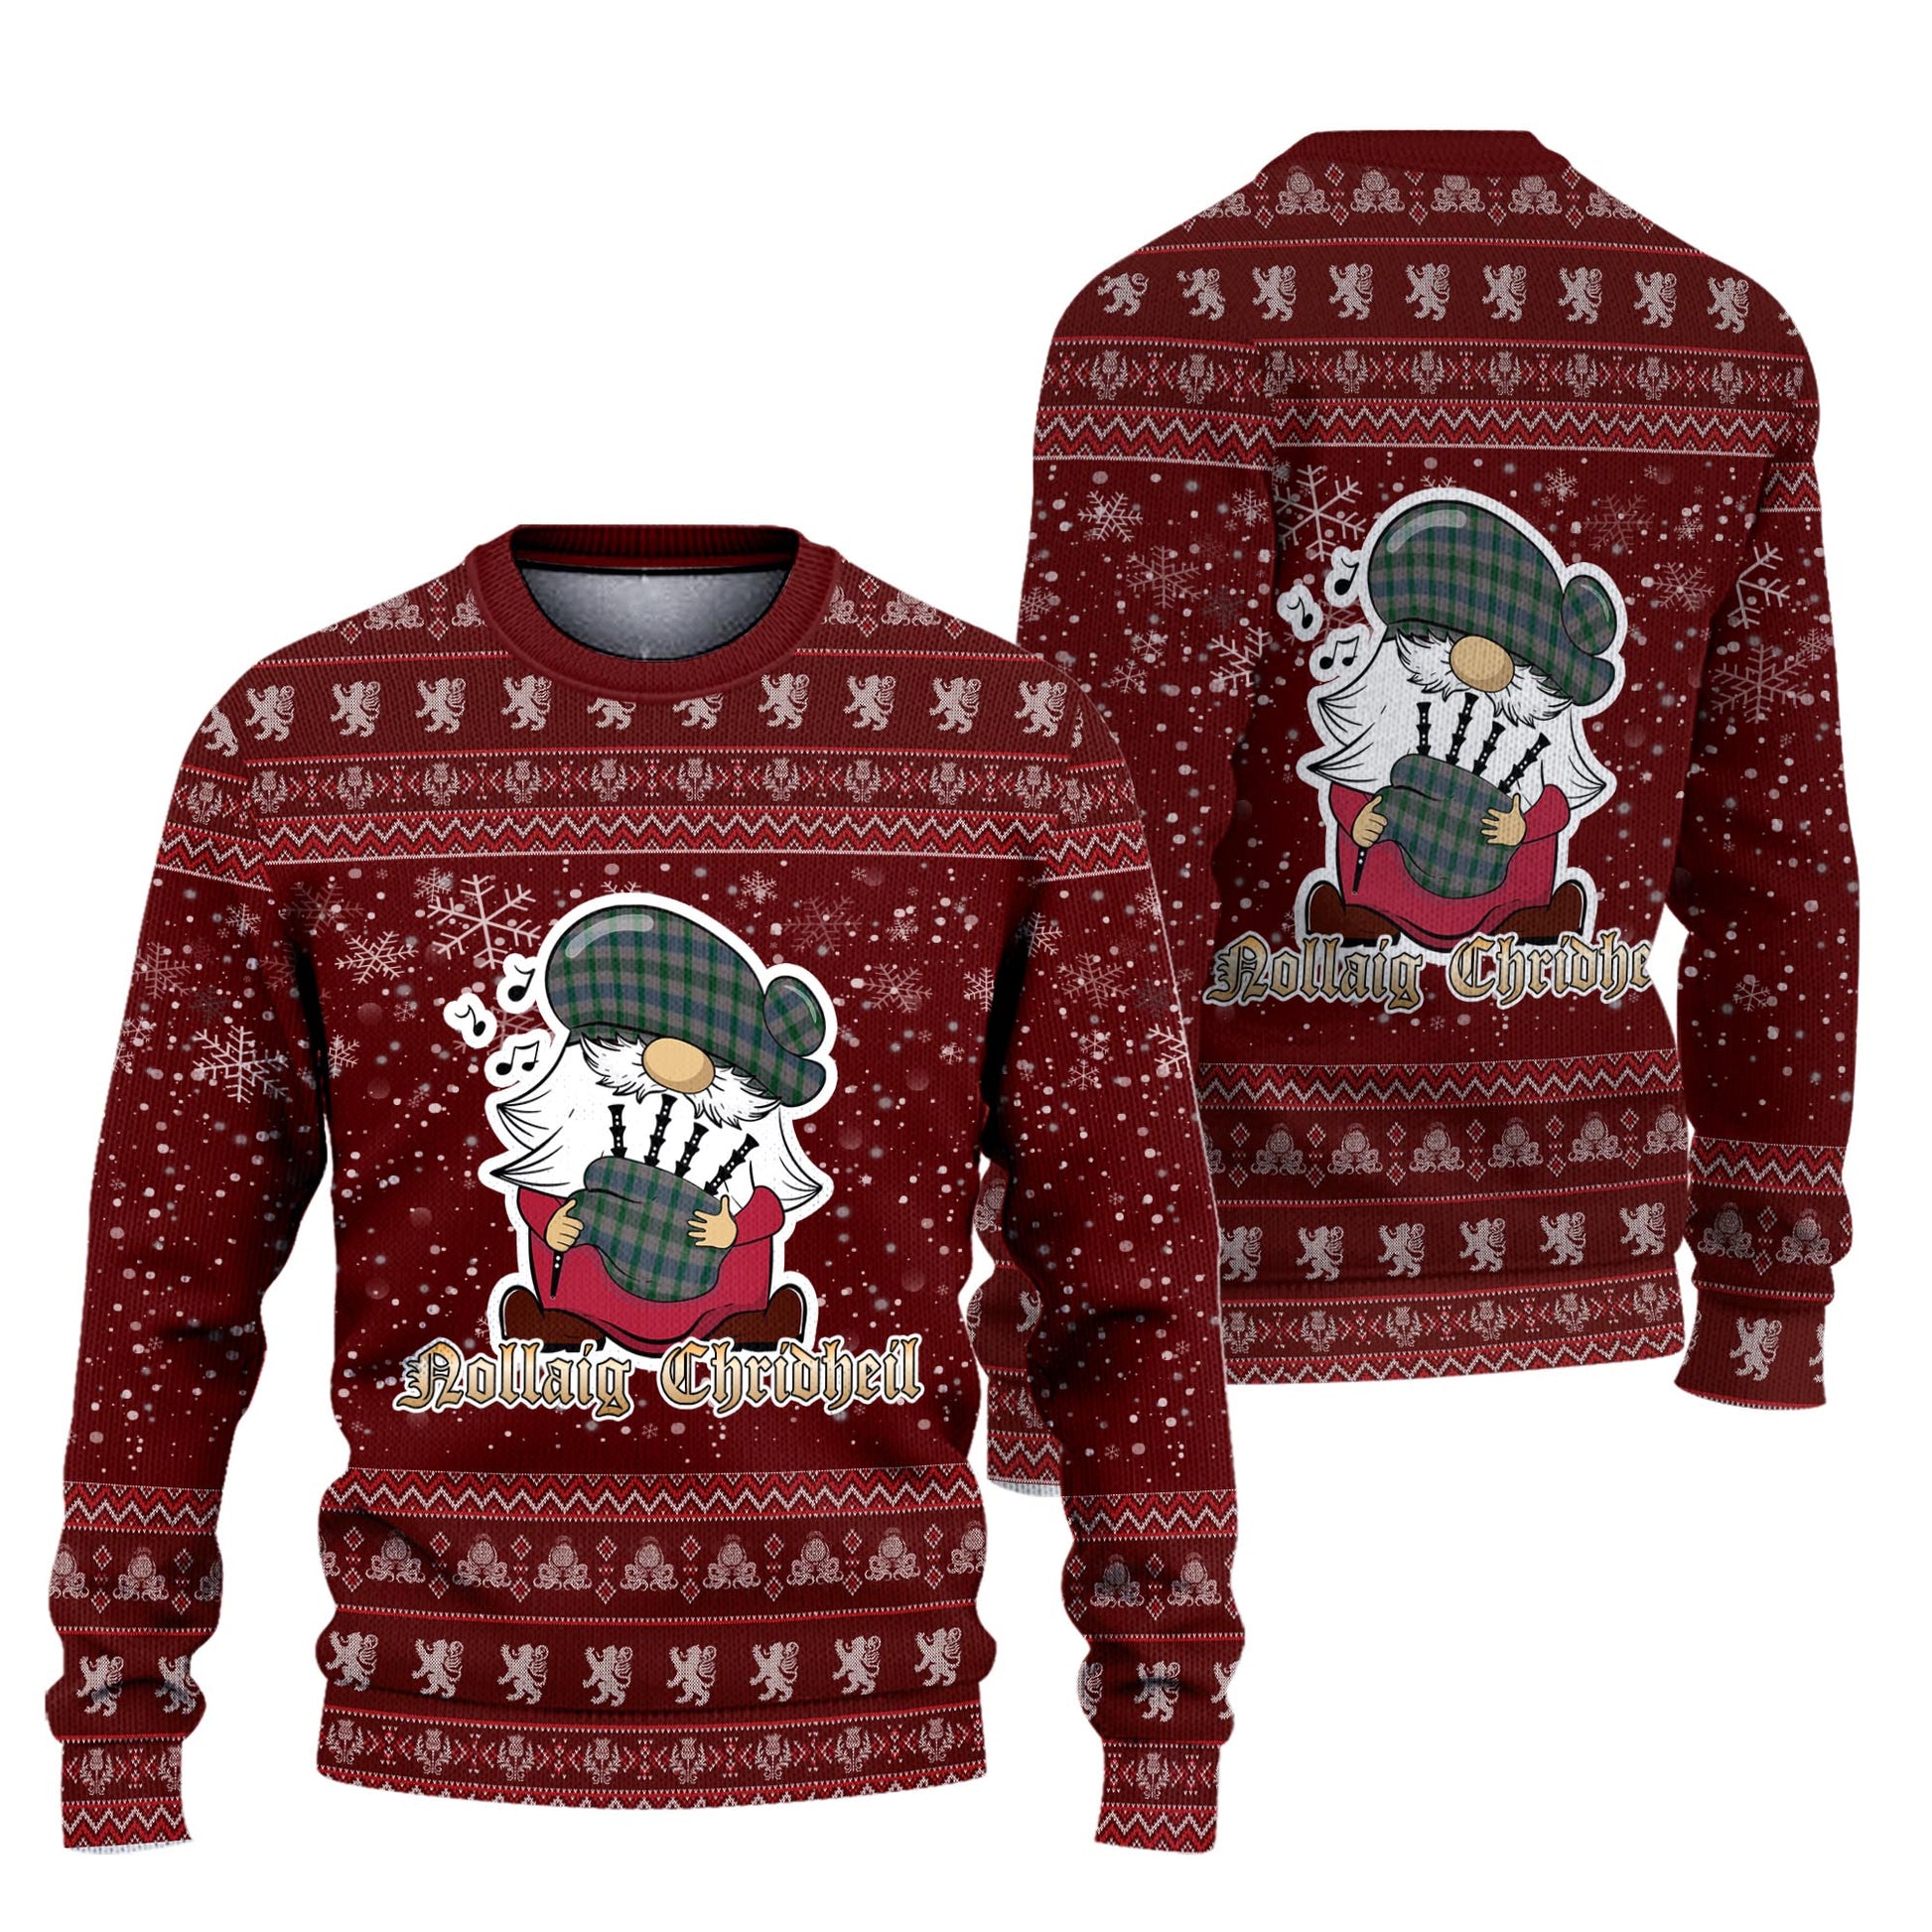 Lloyd of Wales Clan Christmas Family Knitted Sweater with Funny Gnome Playing Bagpipes Unisex Red - Tartanvibesclothing